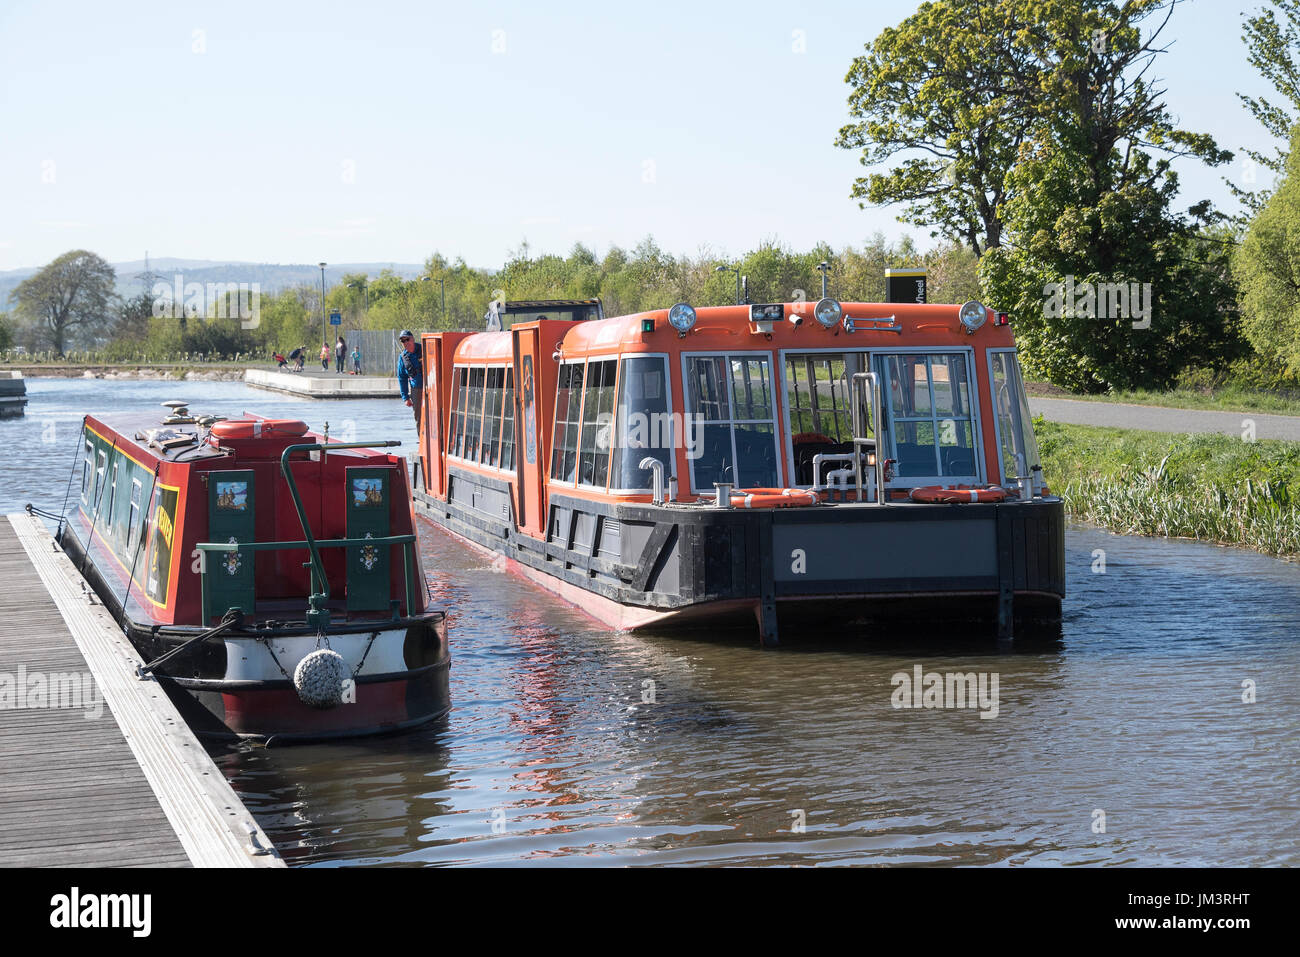 Boat trip visitor attraction on the Forth & Clyde and Union canals at the Falkirk Wheel. Stock Photo